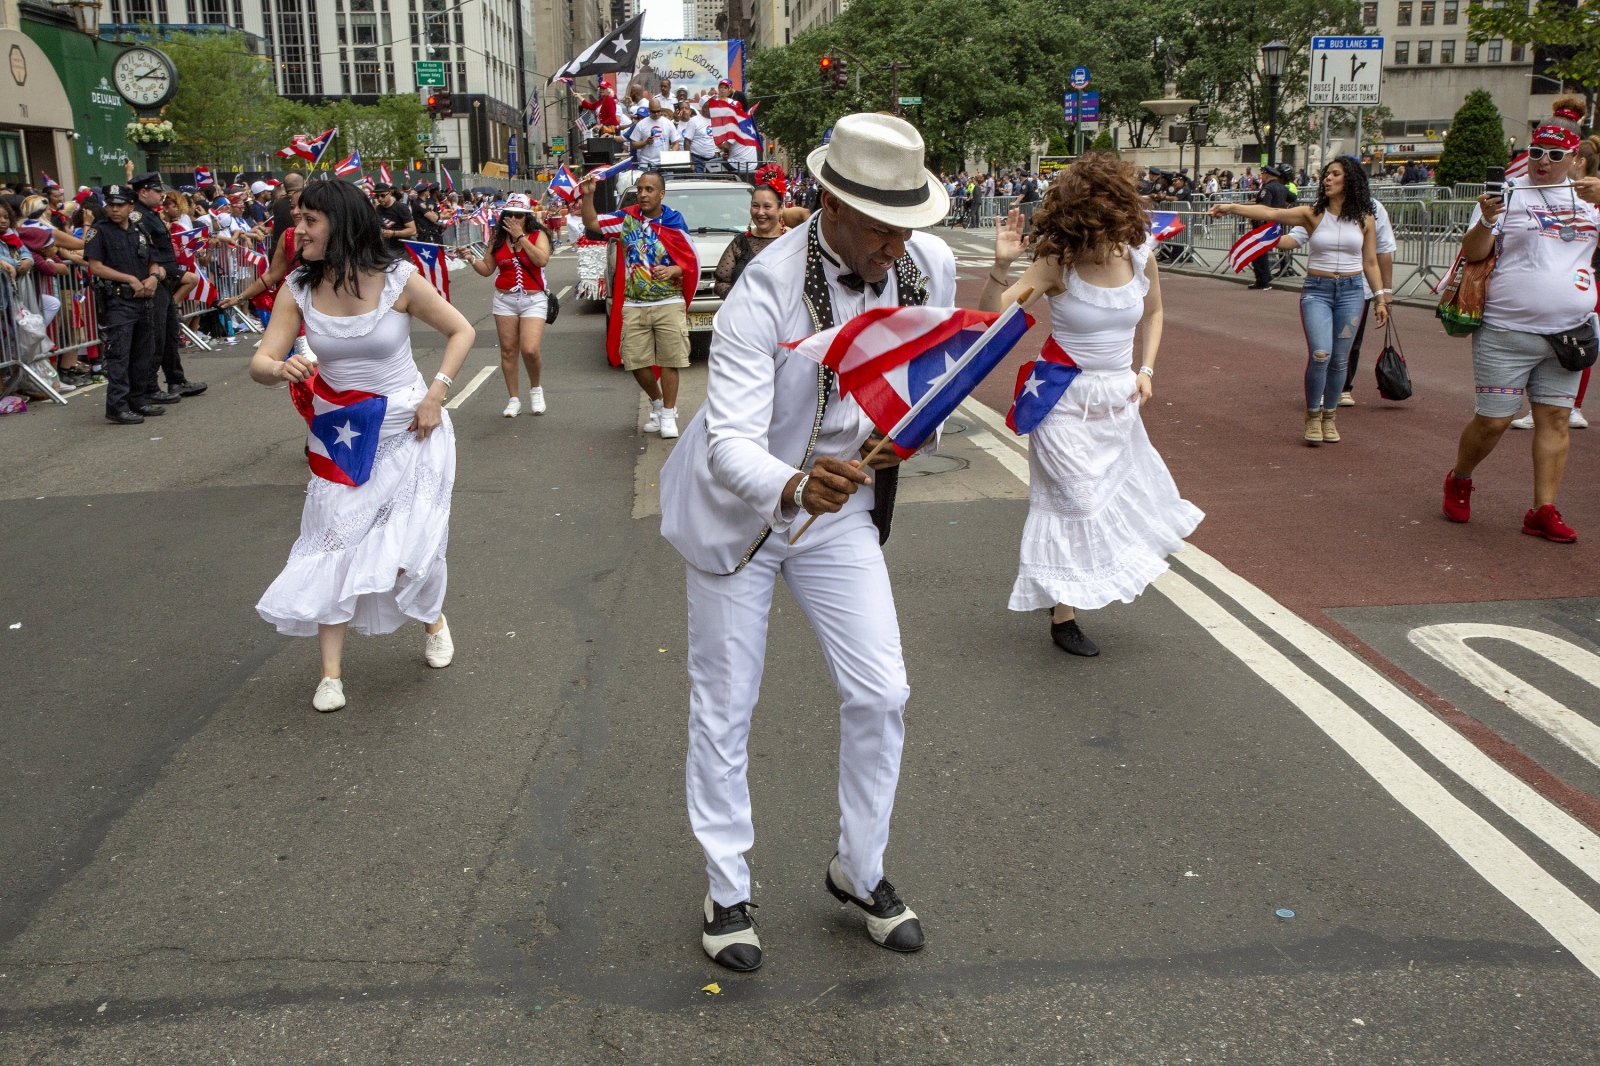  Tales From Trumpland. Puerto Rican Day Parade today, June 10, 2018, was not only a celebration of pride and joy but also a protest against the Trump administrationâ€™s handling of the aftermath of Hurricane Maria a year ago. A new Harvard study published Tuesday in the New England Journal of Medicine estimates that at least 4,645 deaths can be linked to the hurricane and its immediate aftermath, making the storm far deadlier than previously thought. ( Kevin C Downs/Agence Cosmos) 